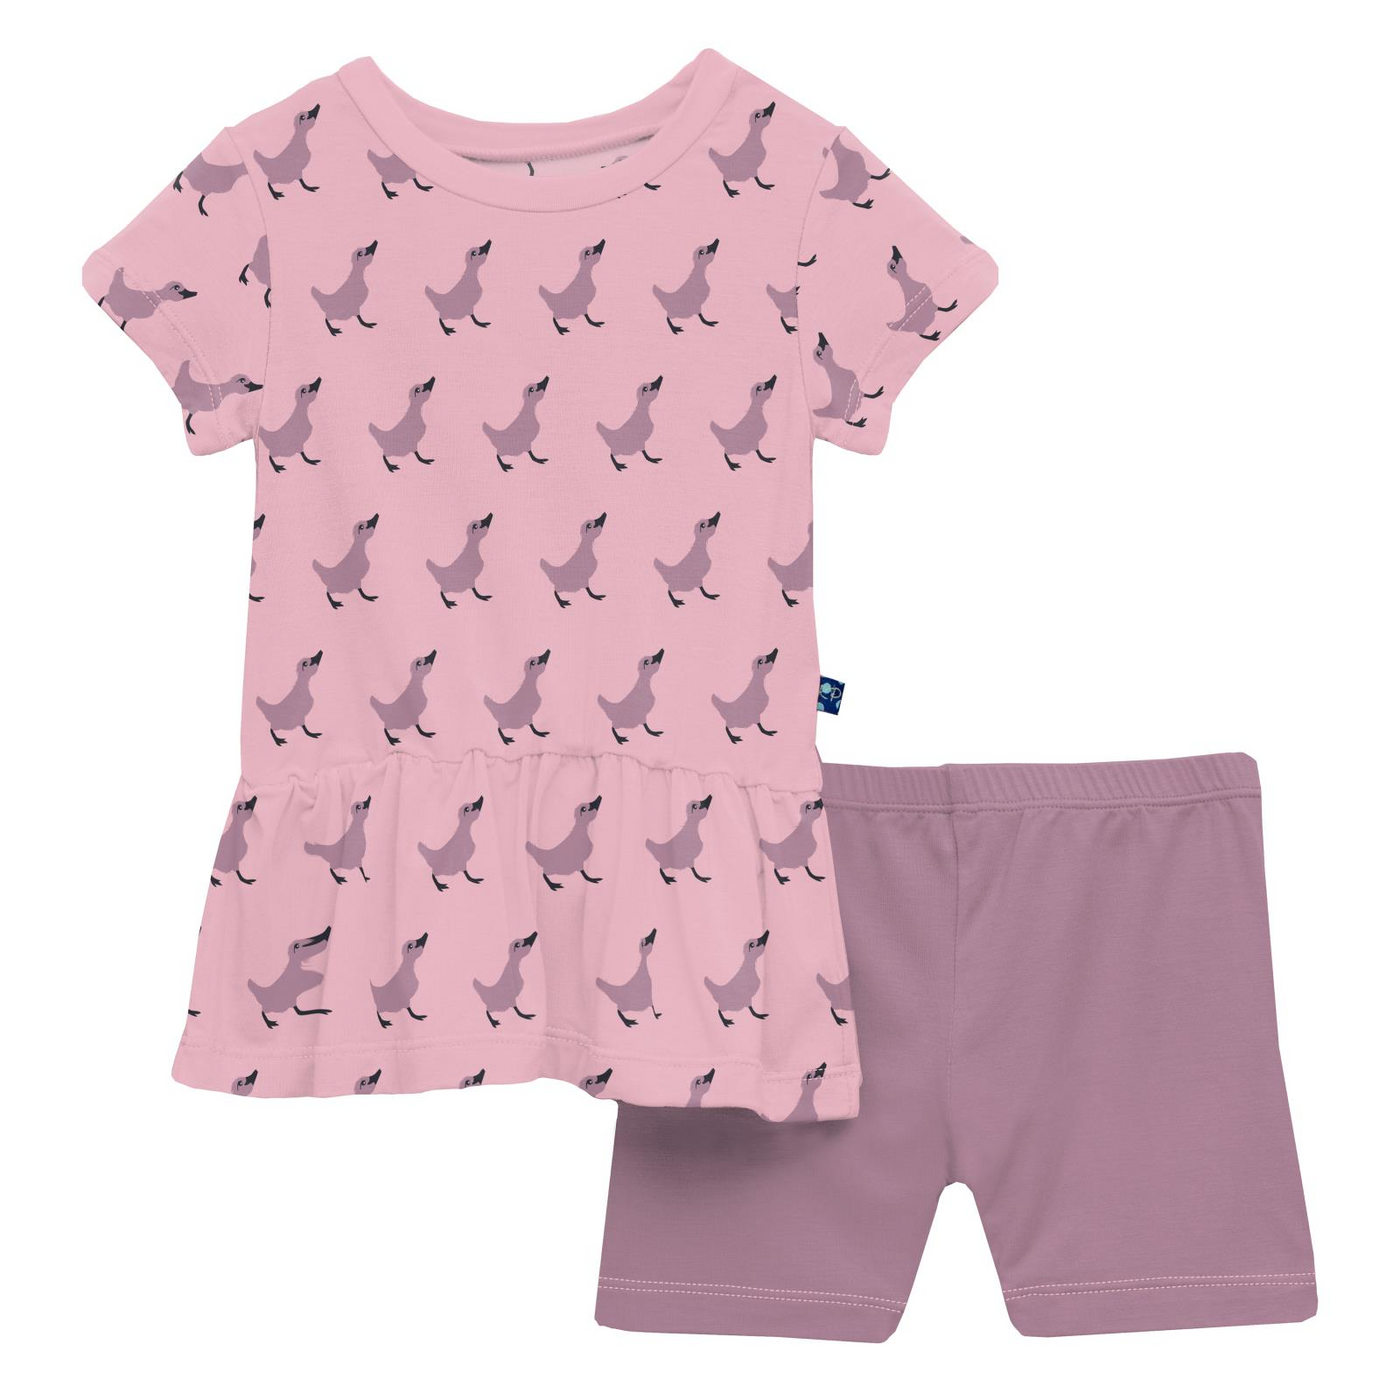 Kickee Pants Playtime Outfit Set: Cake Pop Ugly Duckling